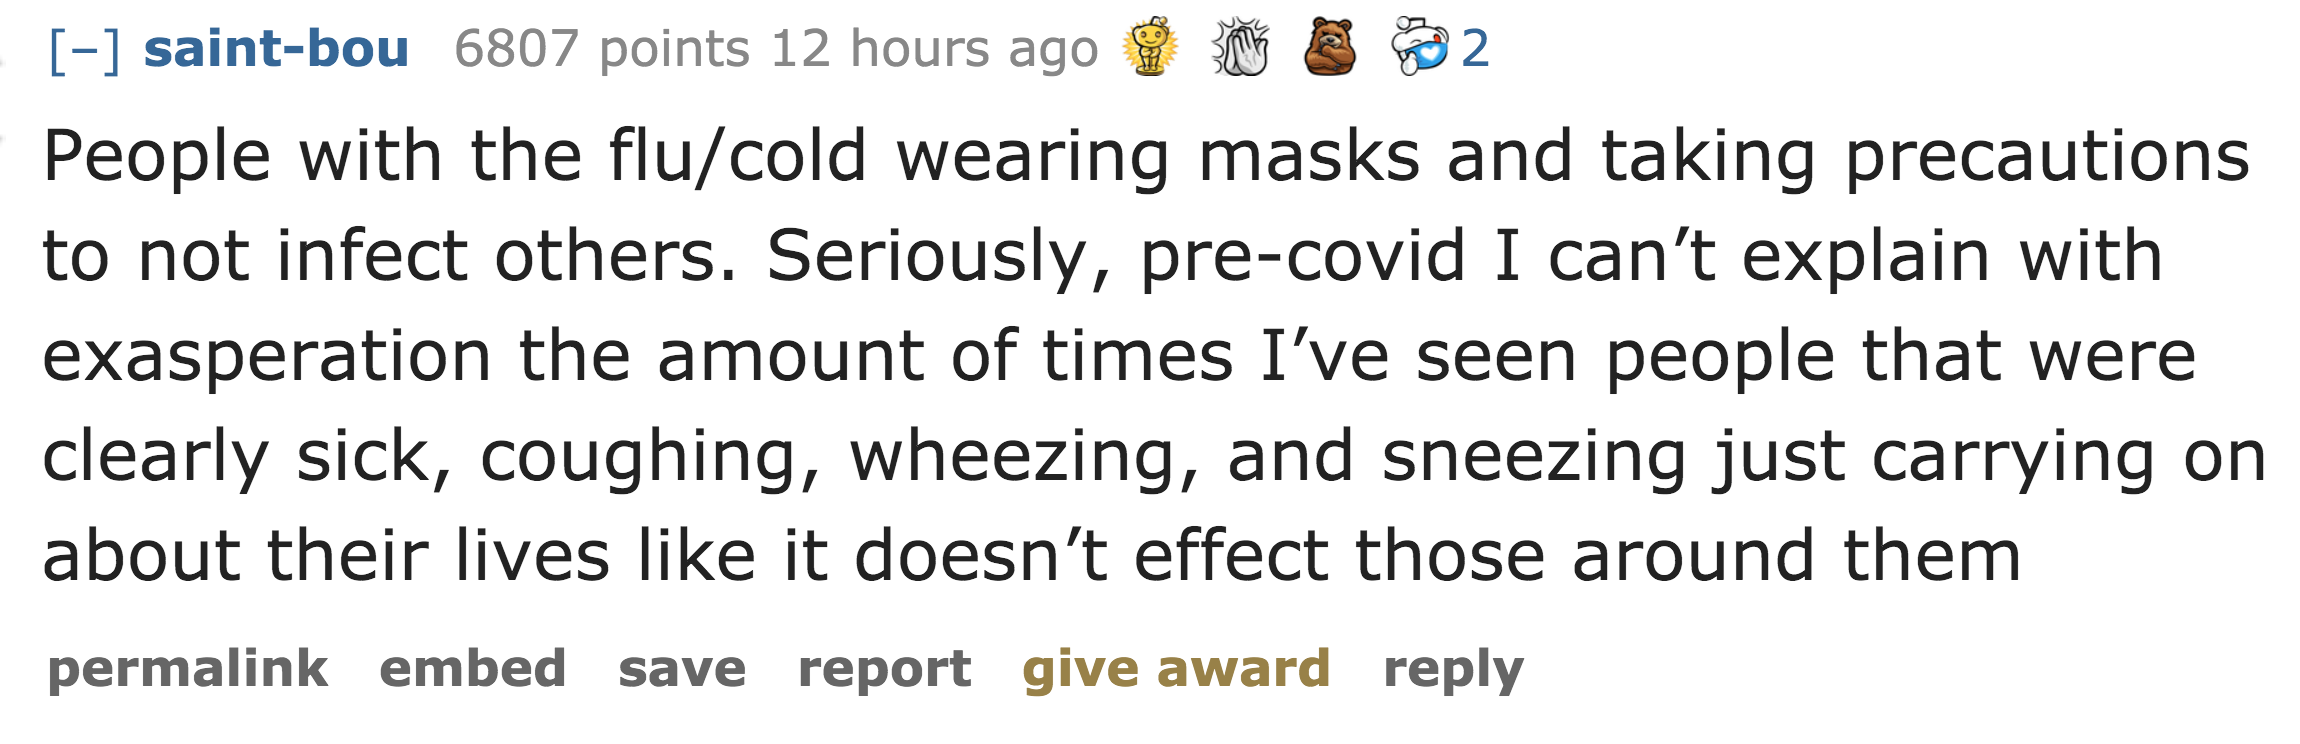 People with the flucold wearing masks and taking precautions to not infect others. Seriously, precovid I can't explain with exasperation the amount of times I've seen people that were clearly sick, coughing, wheezing,